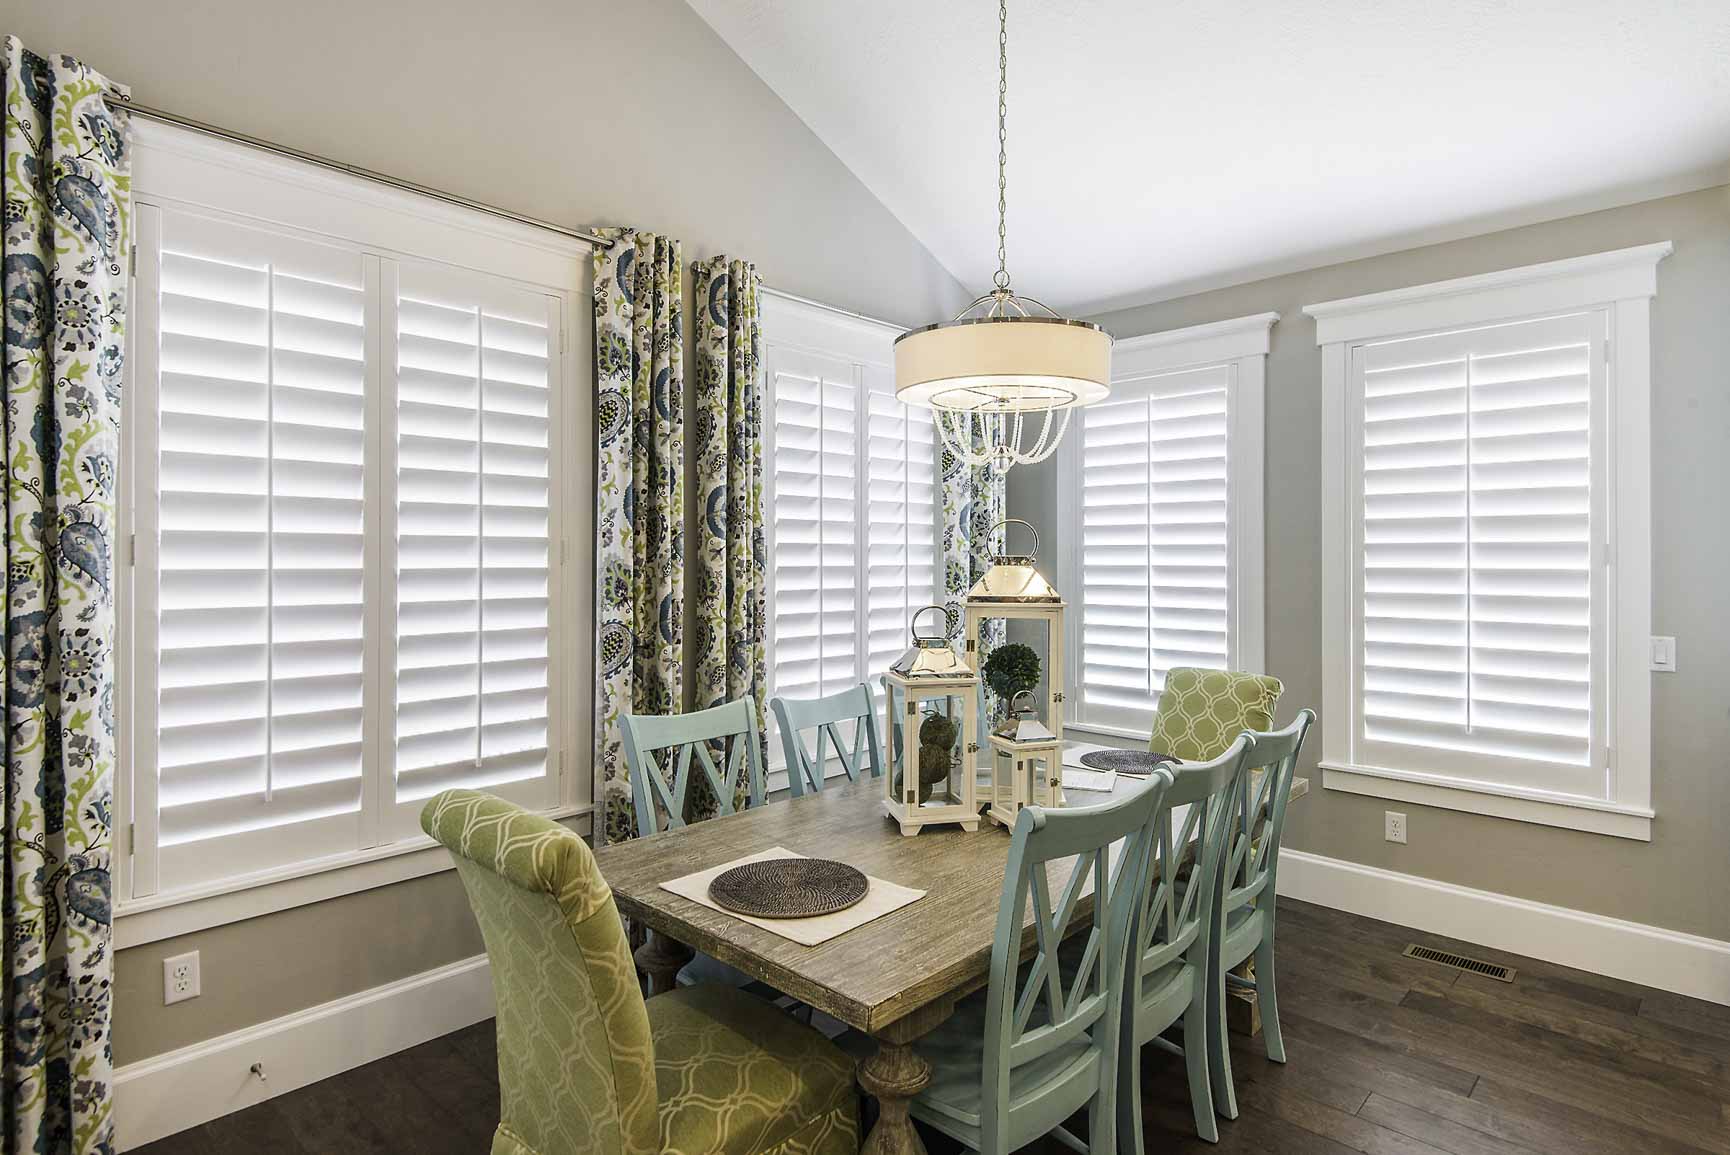 Wasatch Shutter White Planataion Shutters Dining Room 1 